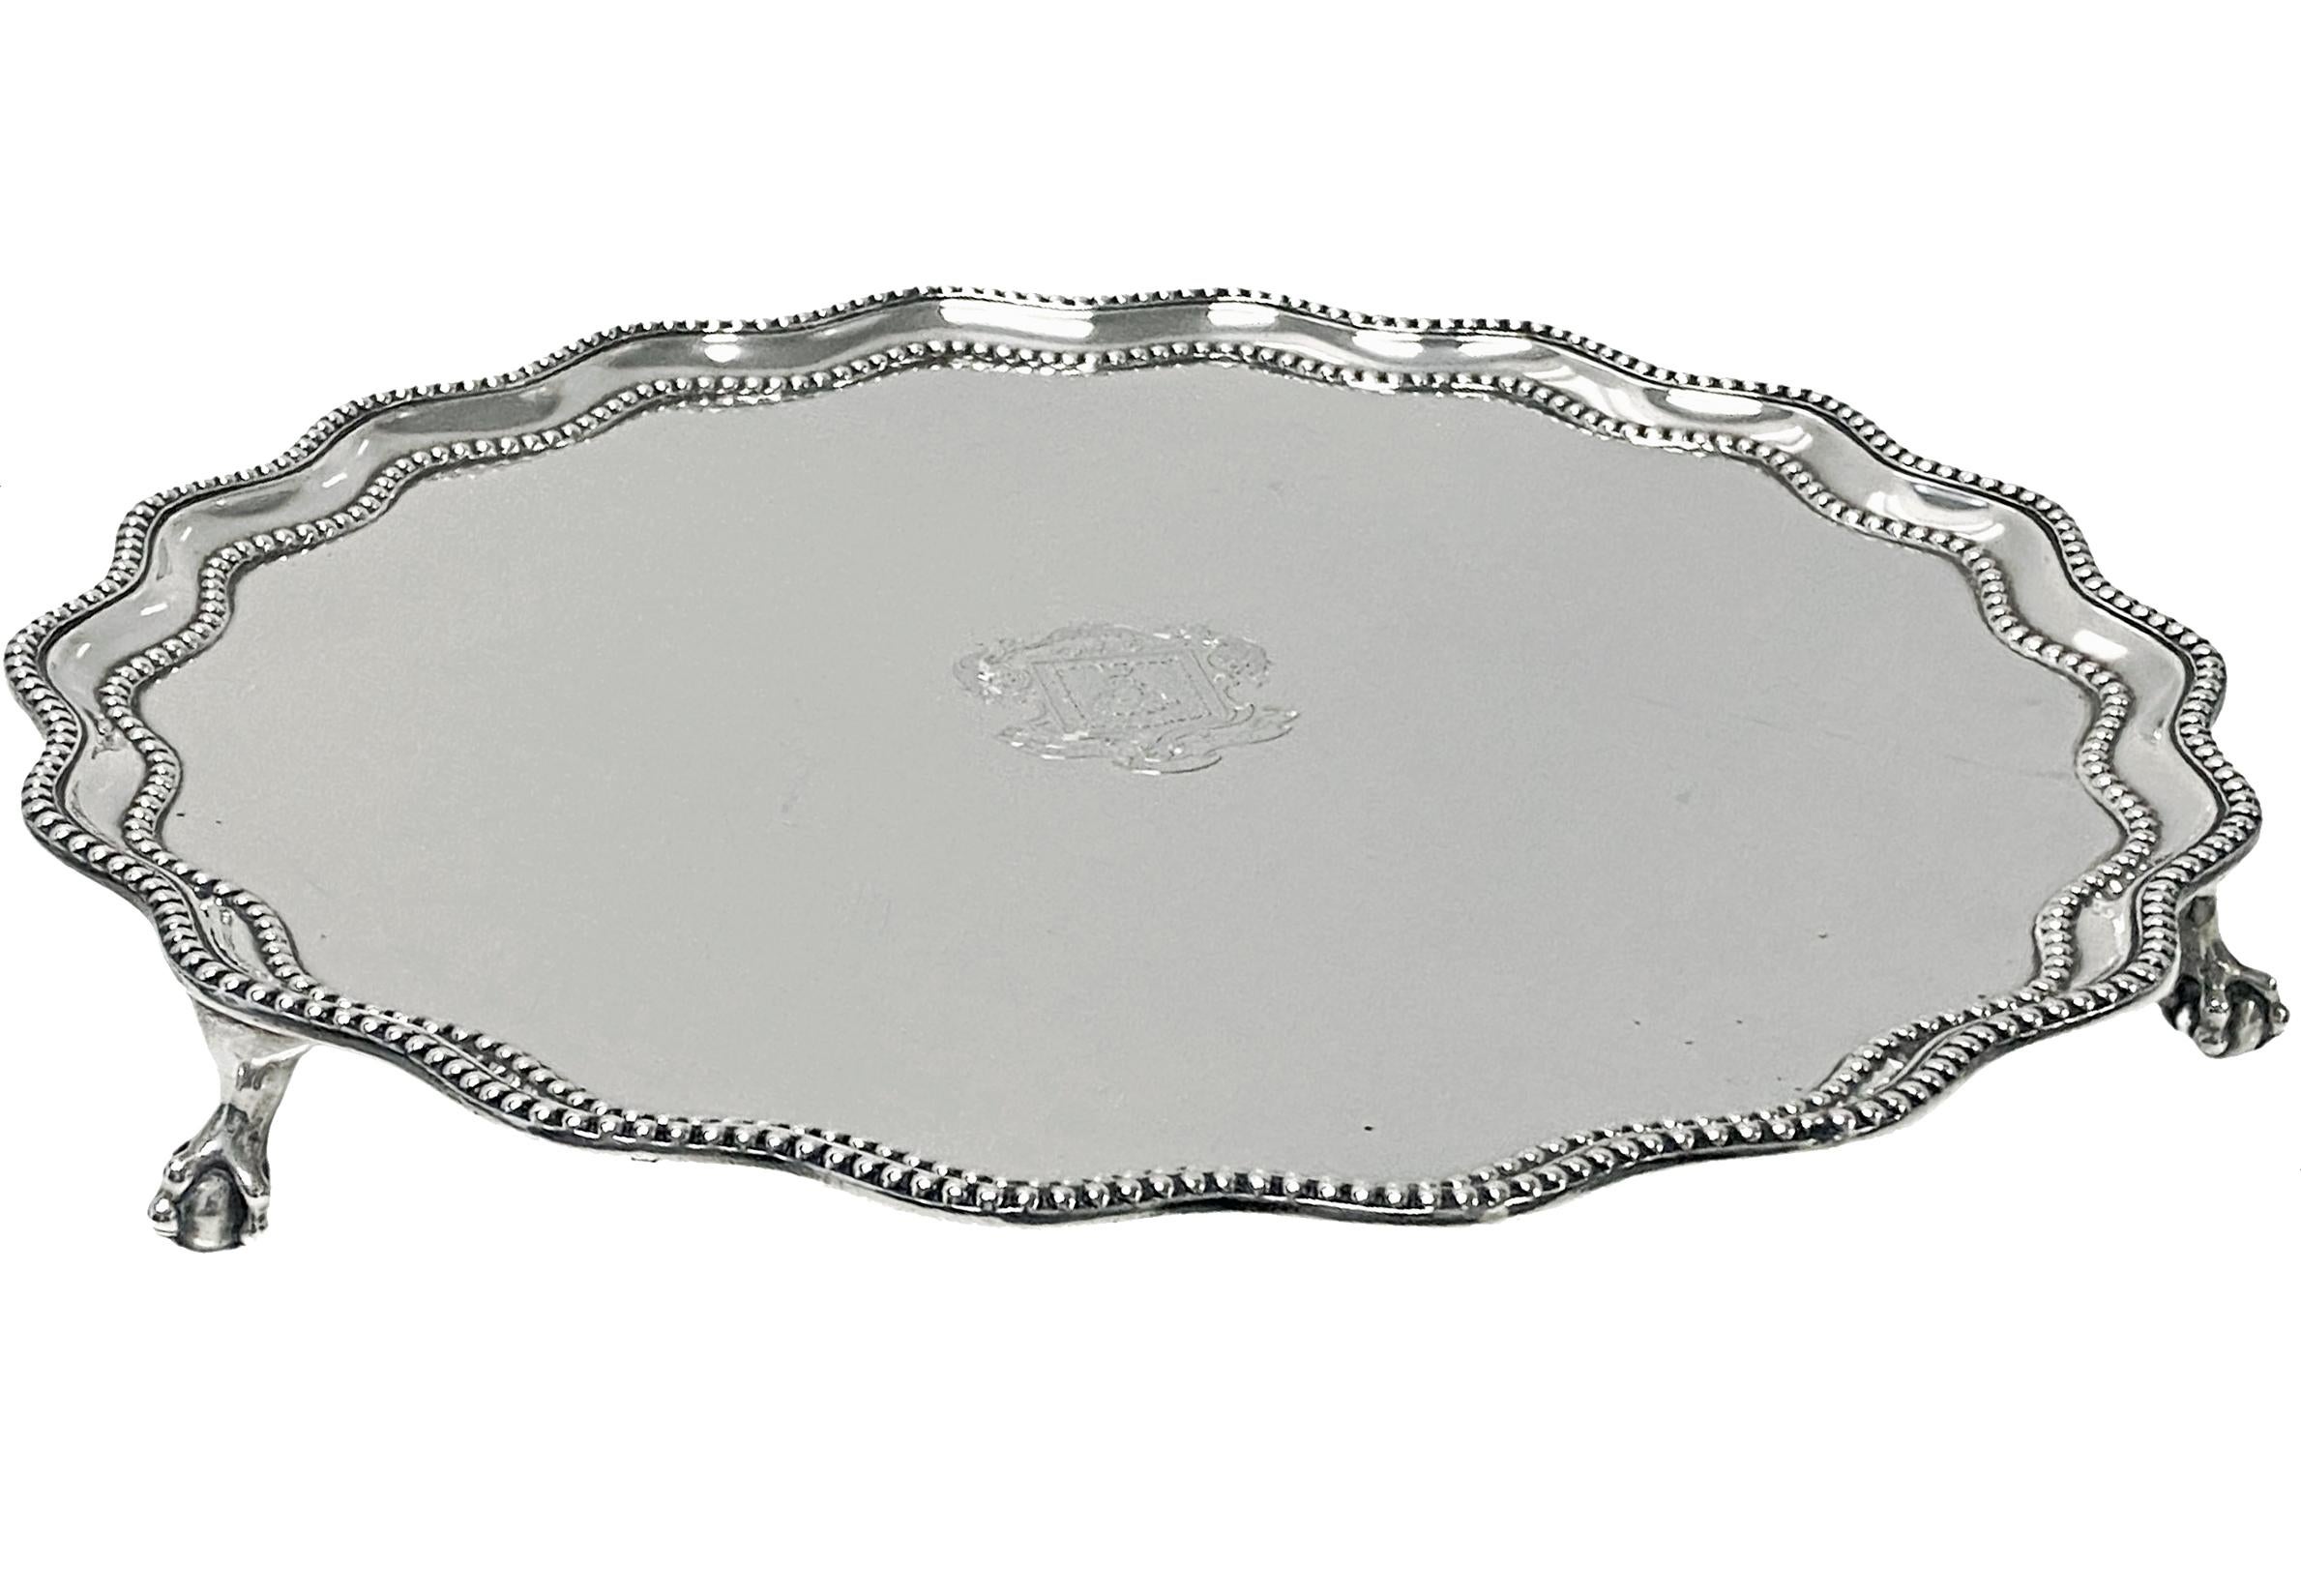 Mercers Company Garrard Antique Silver large Salver London 1897 In Good Condition For Sale In Toronto, Ontario